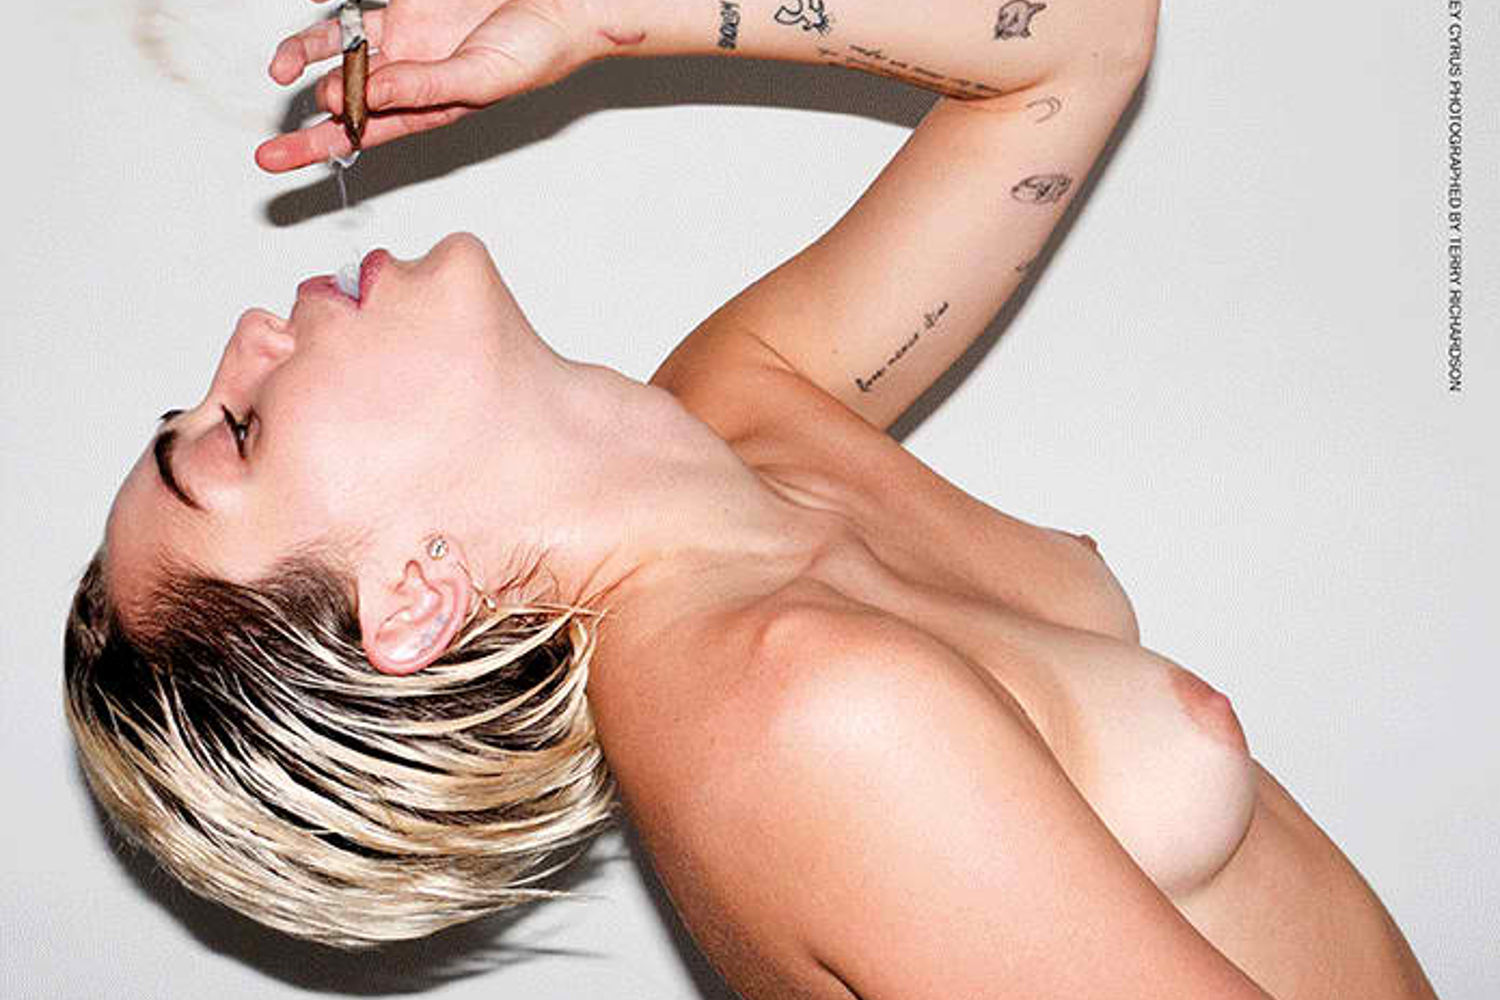 Miley Cyrus Full Frontal Nude for Candy Magazine by Terry Richardson